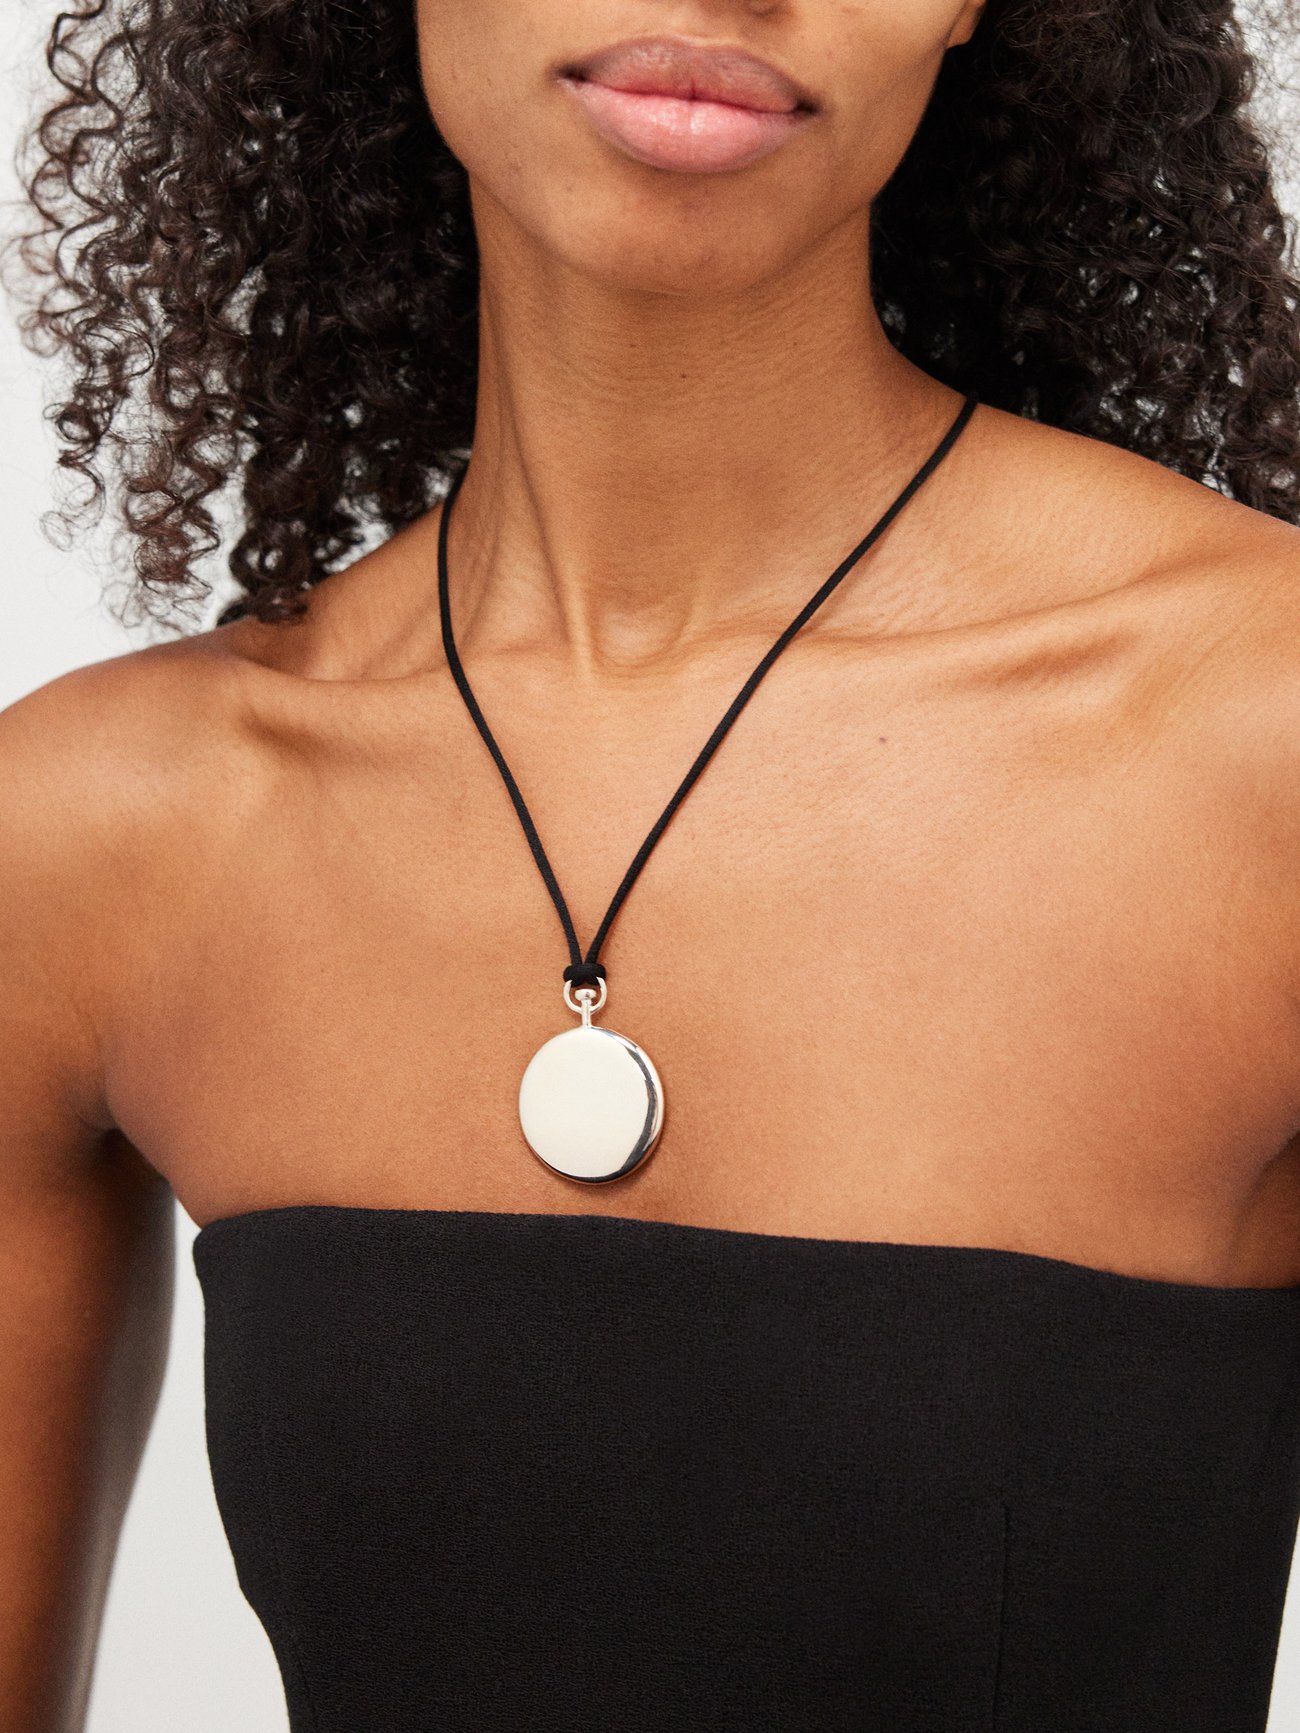 Handcrafted in Los Angeles from sterling silver and satin cord, Sophie Buhai's necklace is centred with a large pendant and features molten-effect teardrop tips.